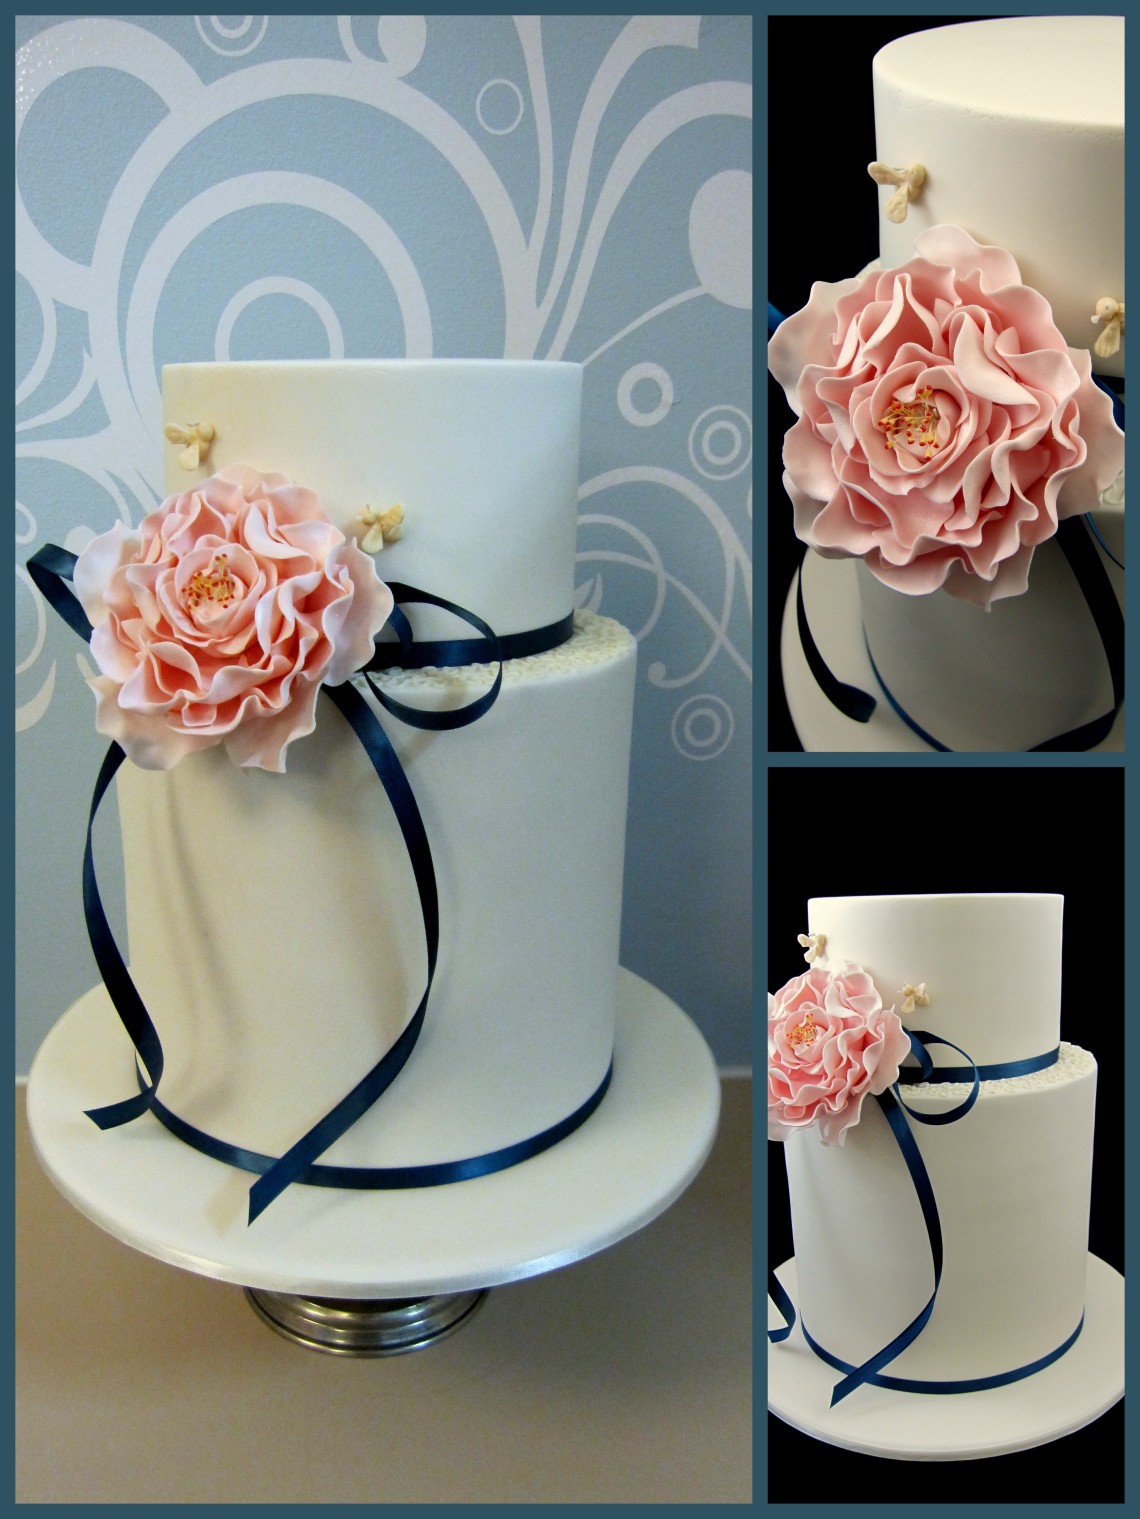 single peony flower wedding cake bees inspired by michelle cake designs